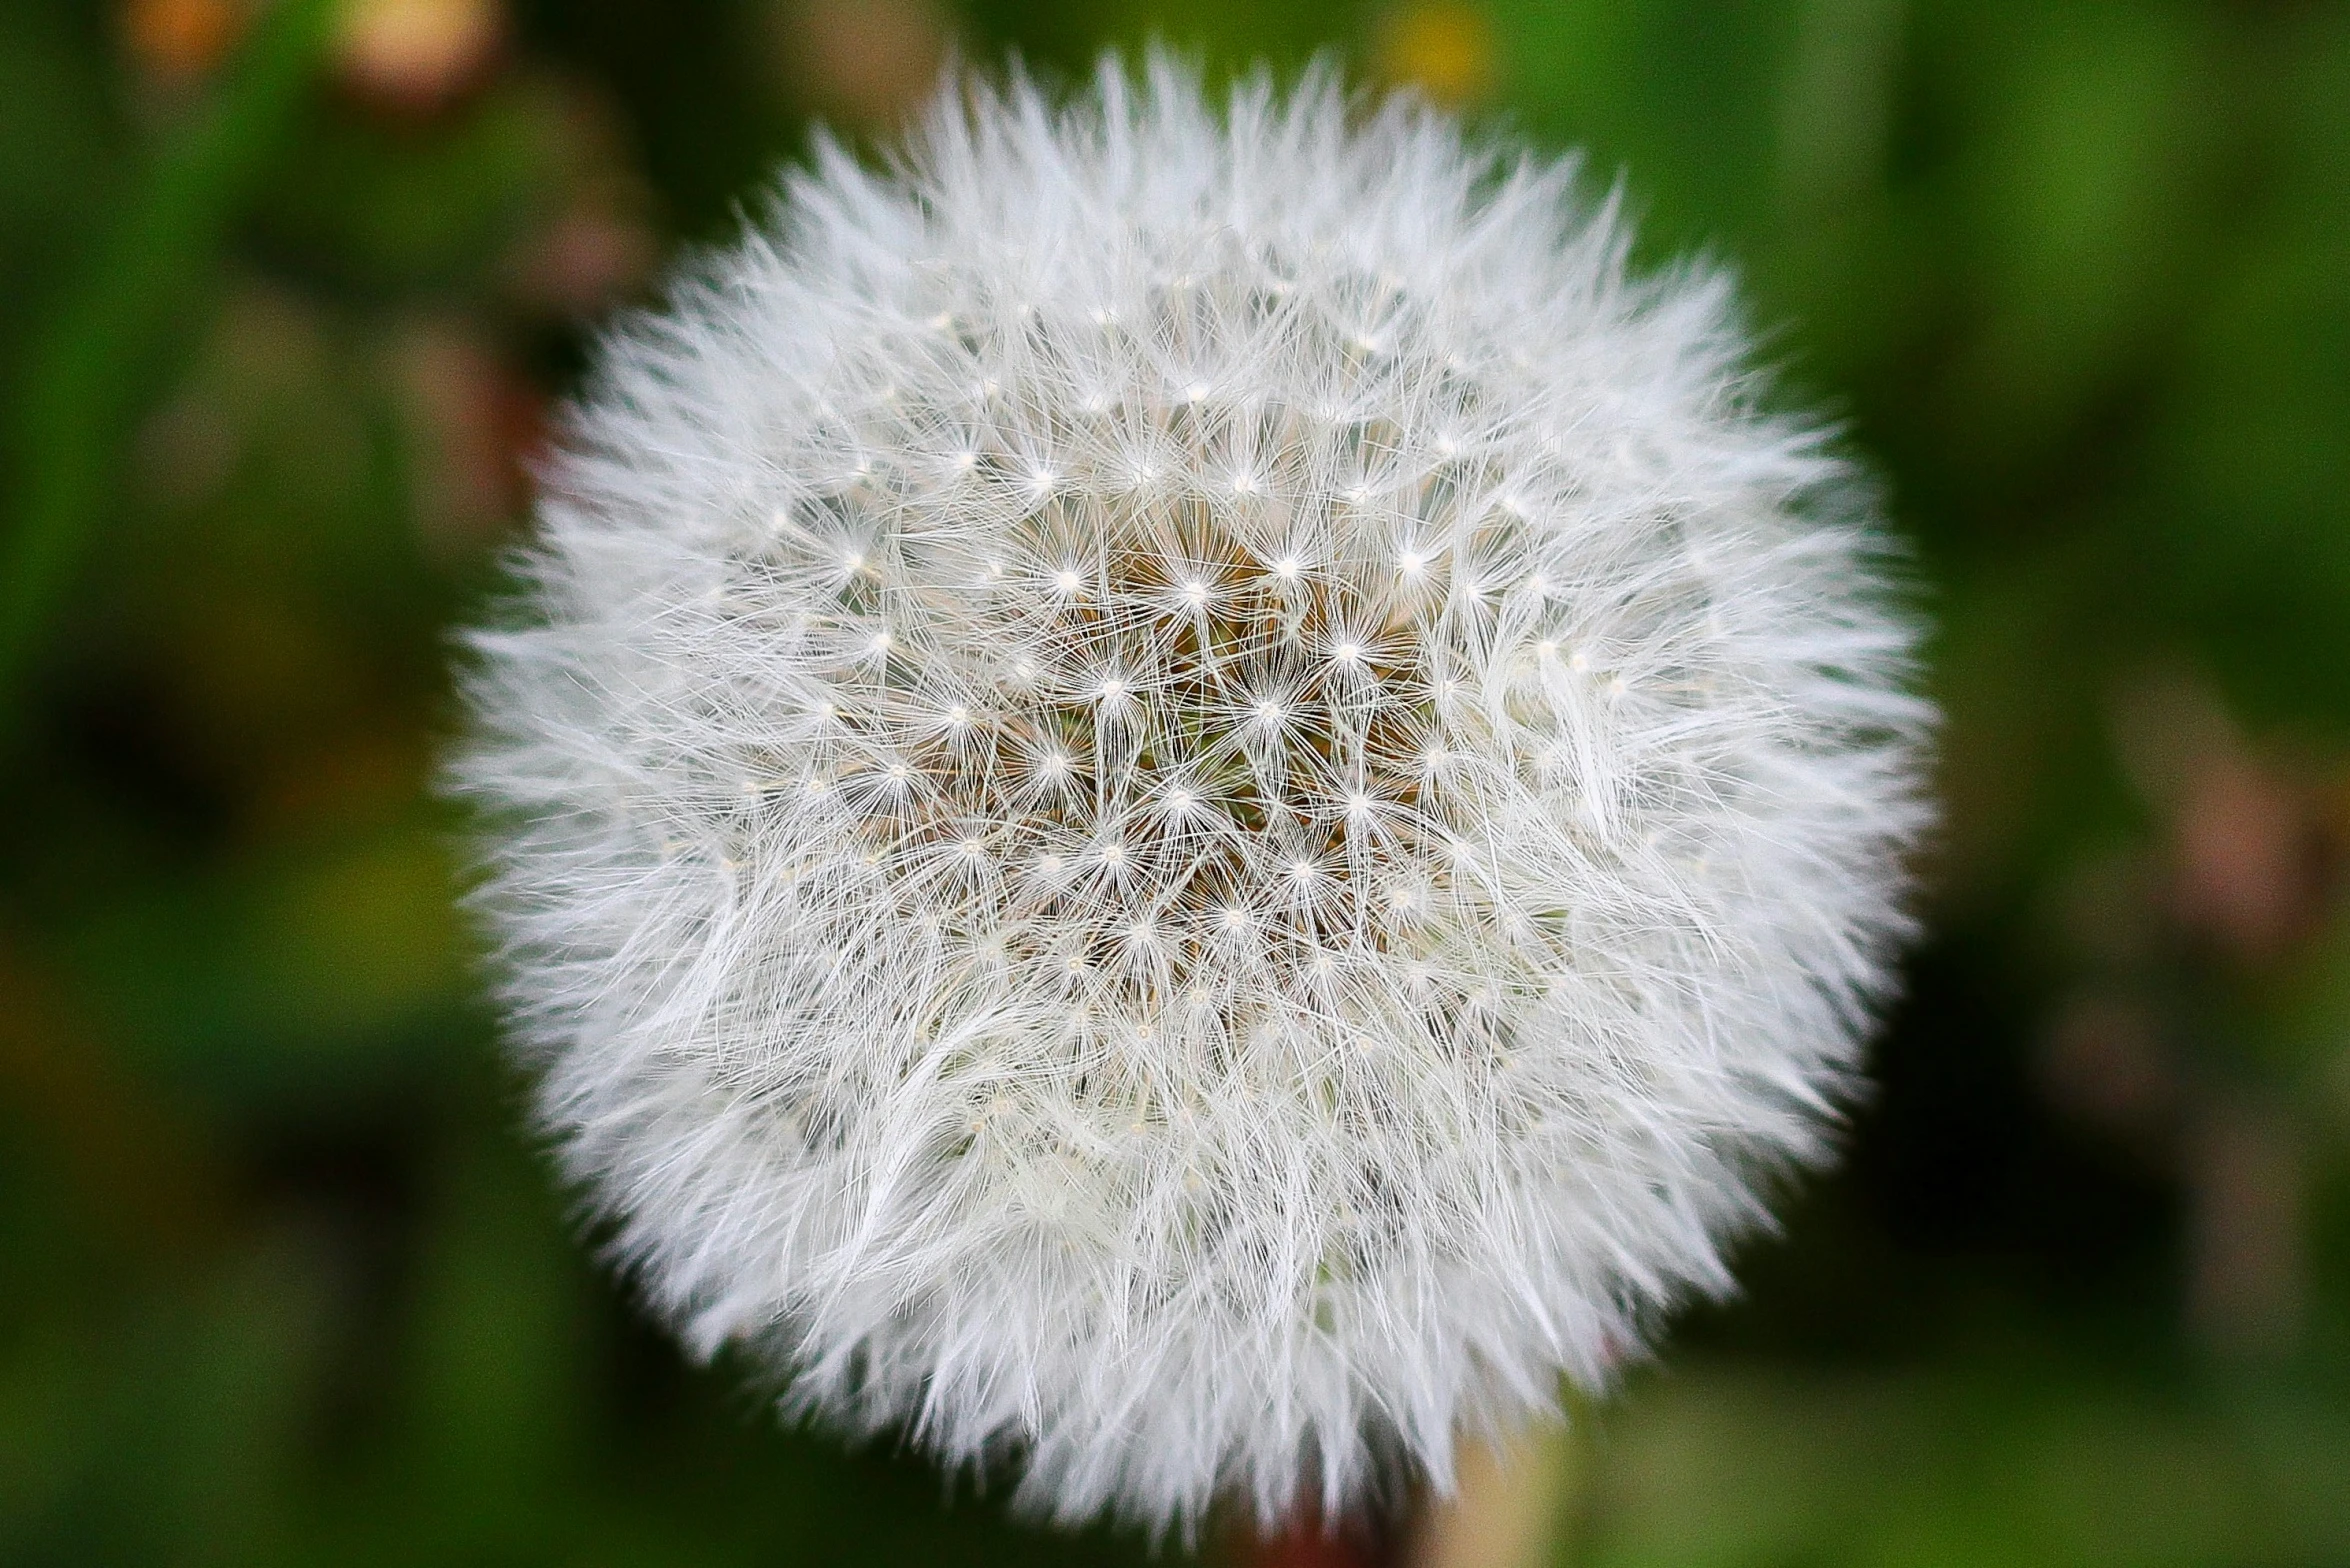 a close up image of the underside of a dandelion